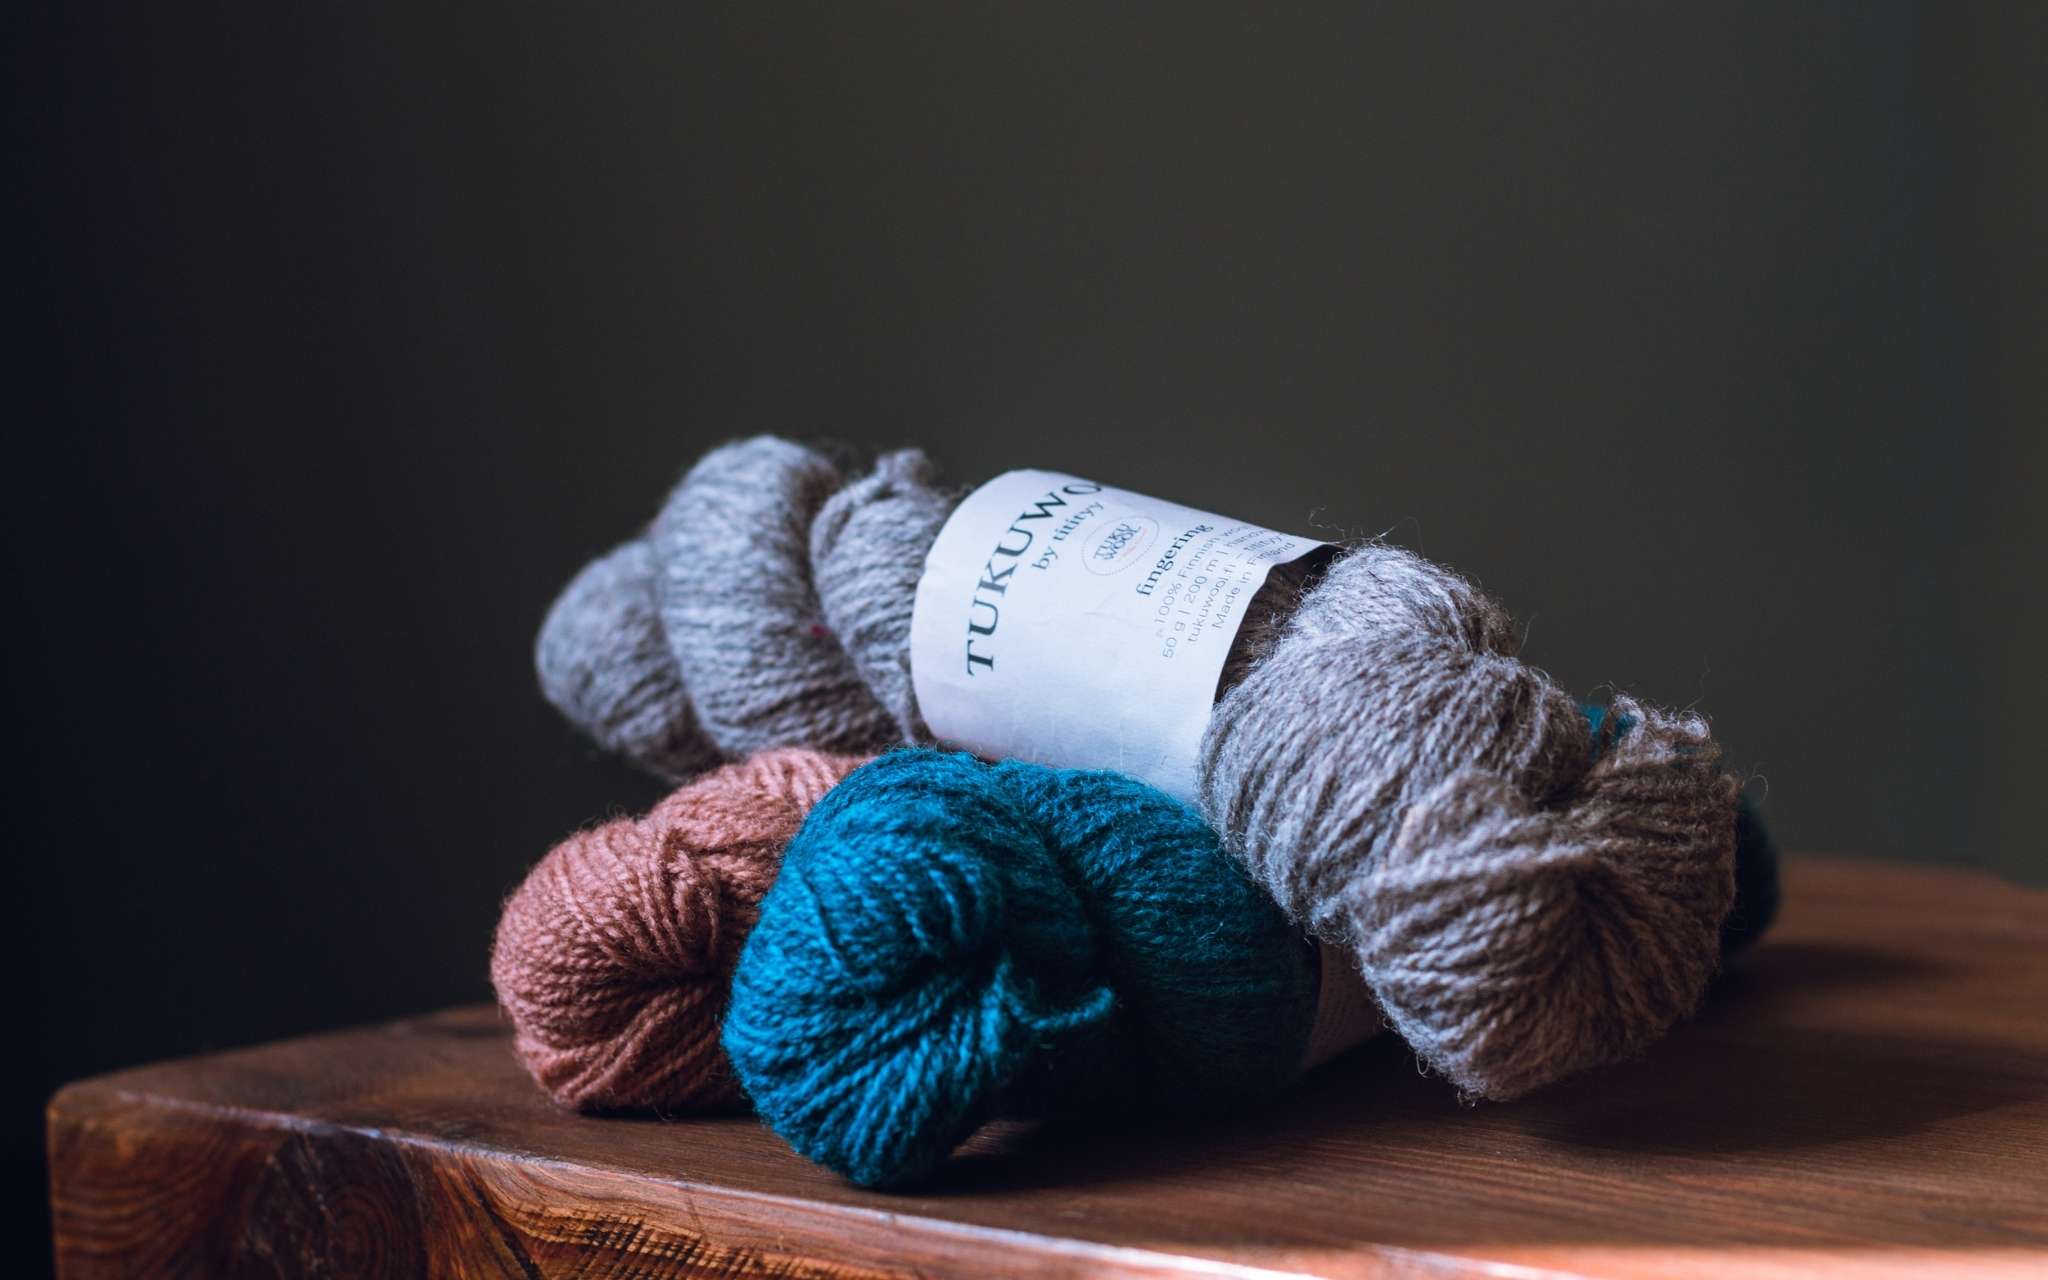 Three skeins of yarn in grey, blue and coral lie piled on top of each other on a table.